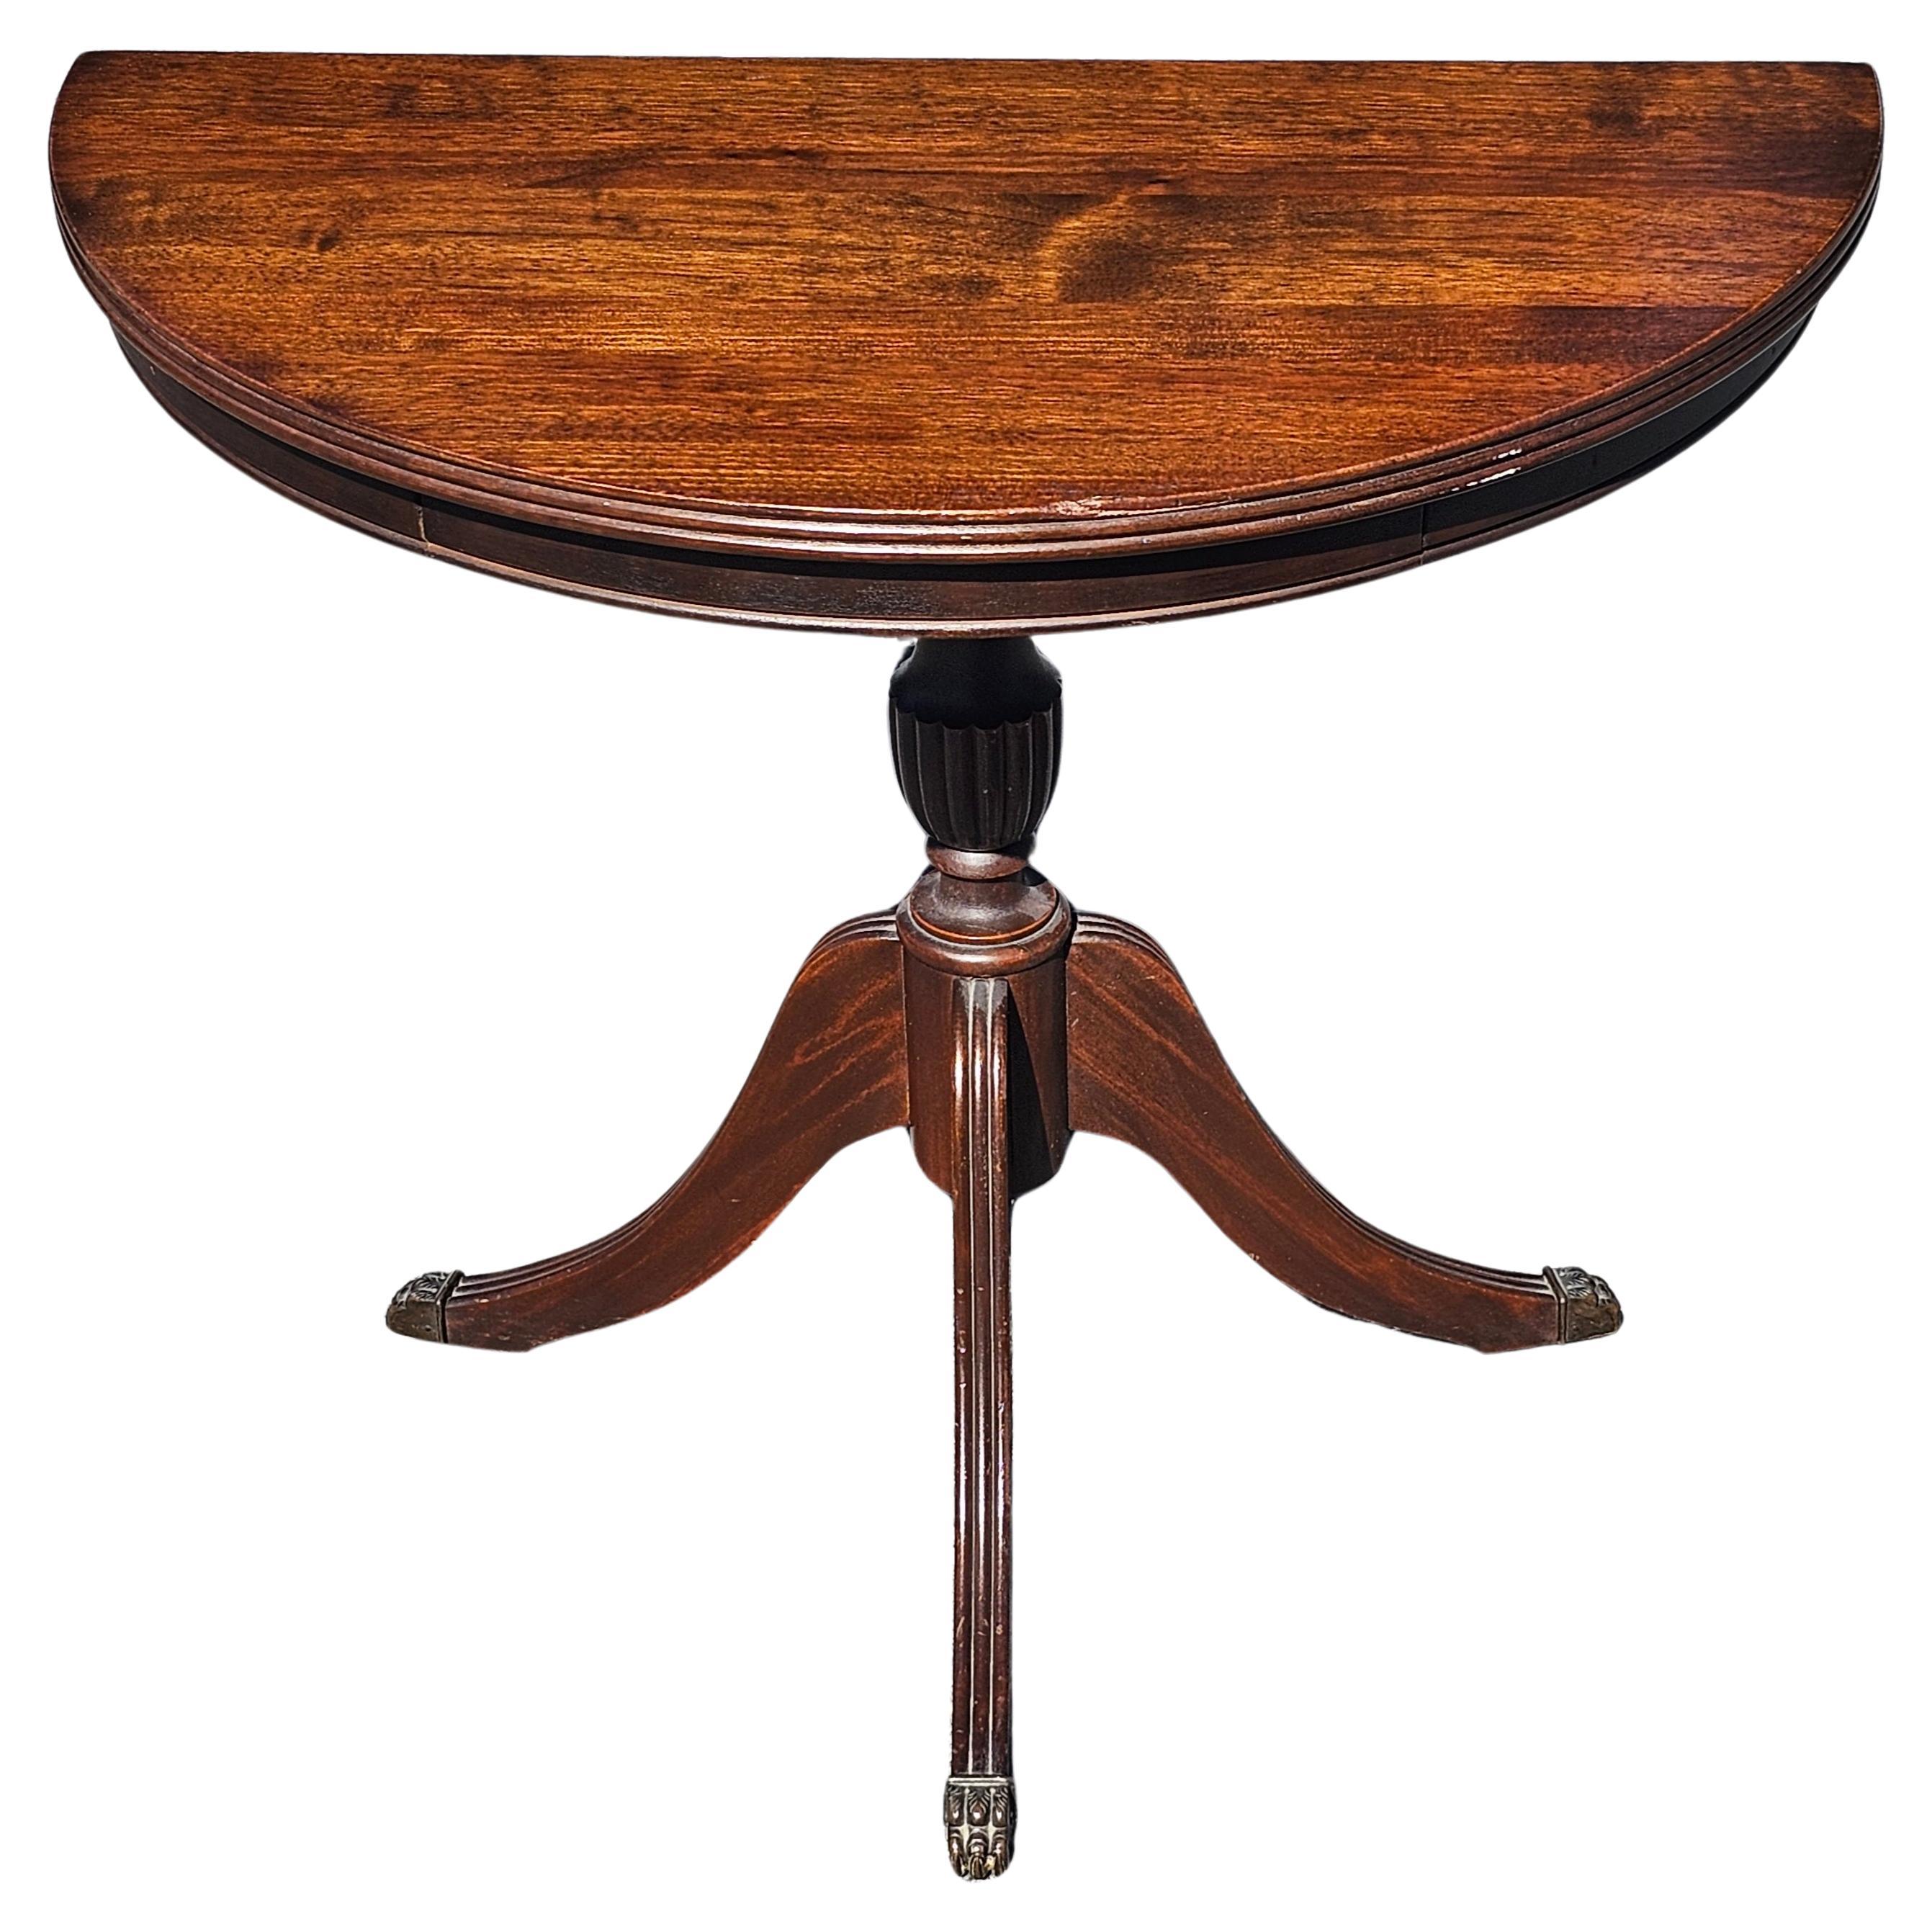 Early 20th Century Federal Mahogany Pedestal Trifid Demilune Table For Sale